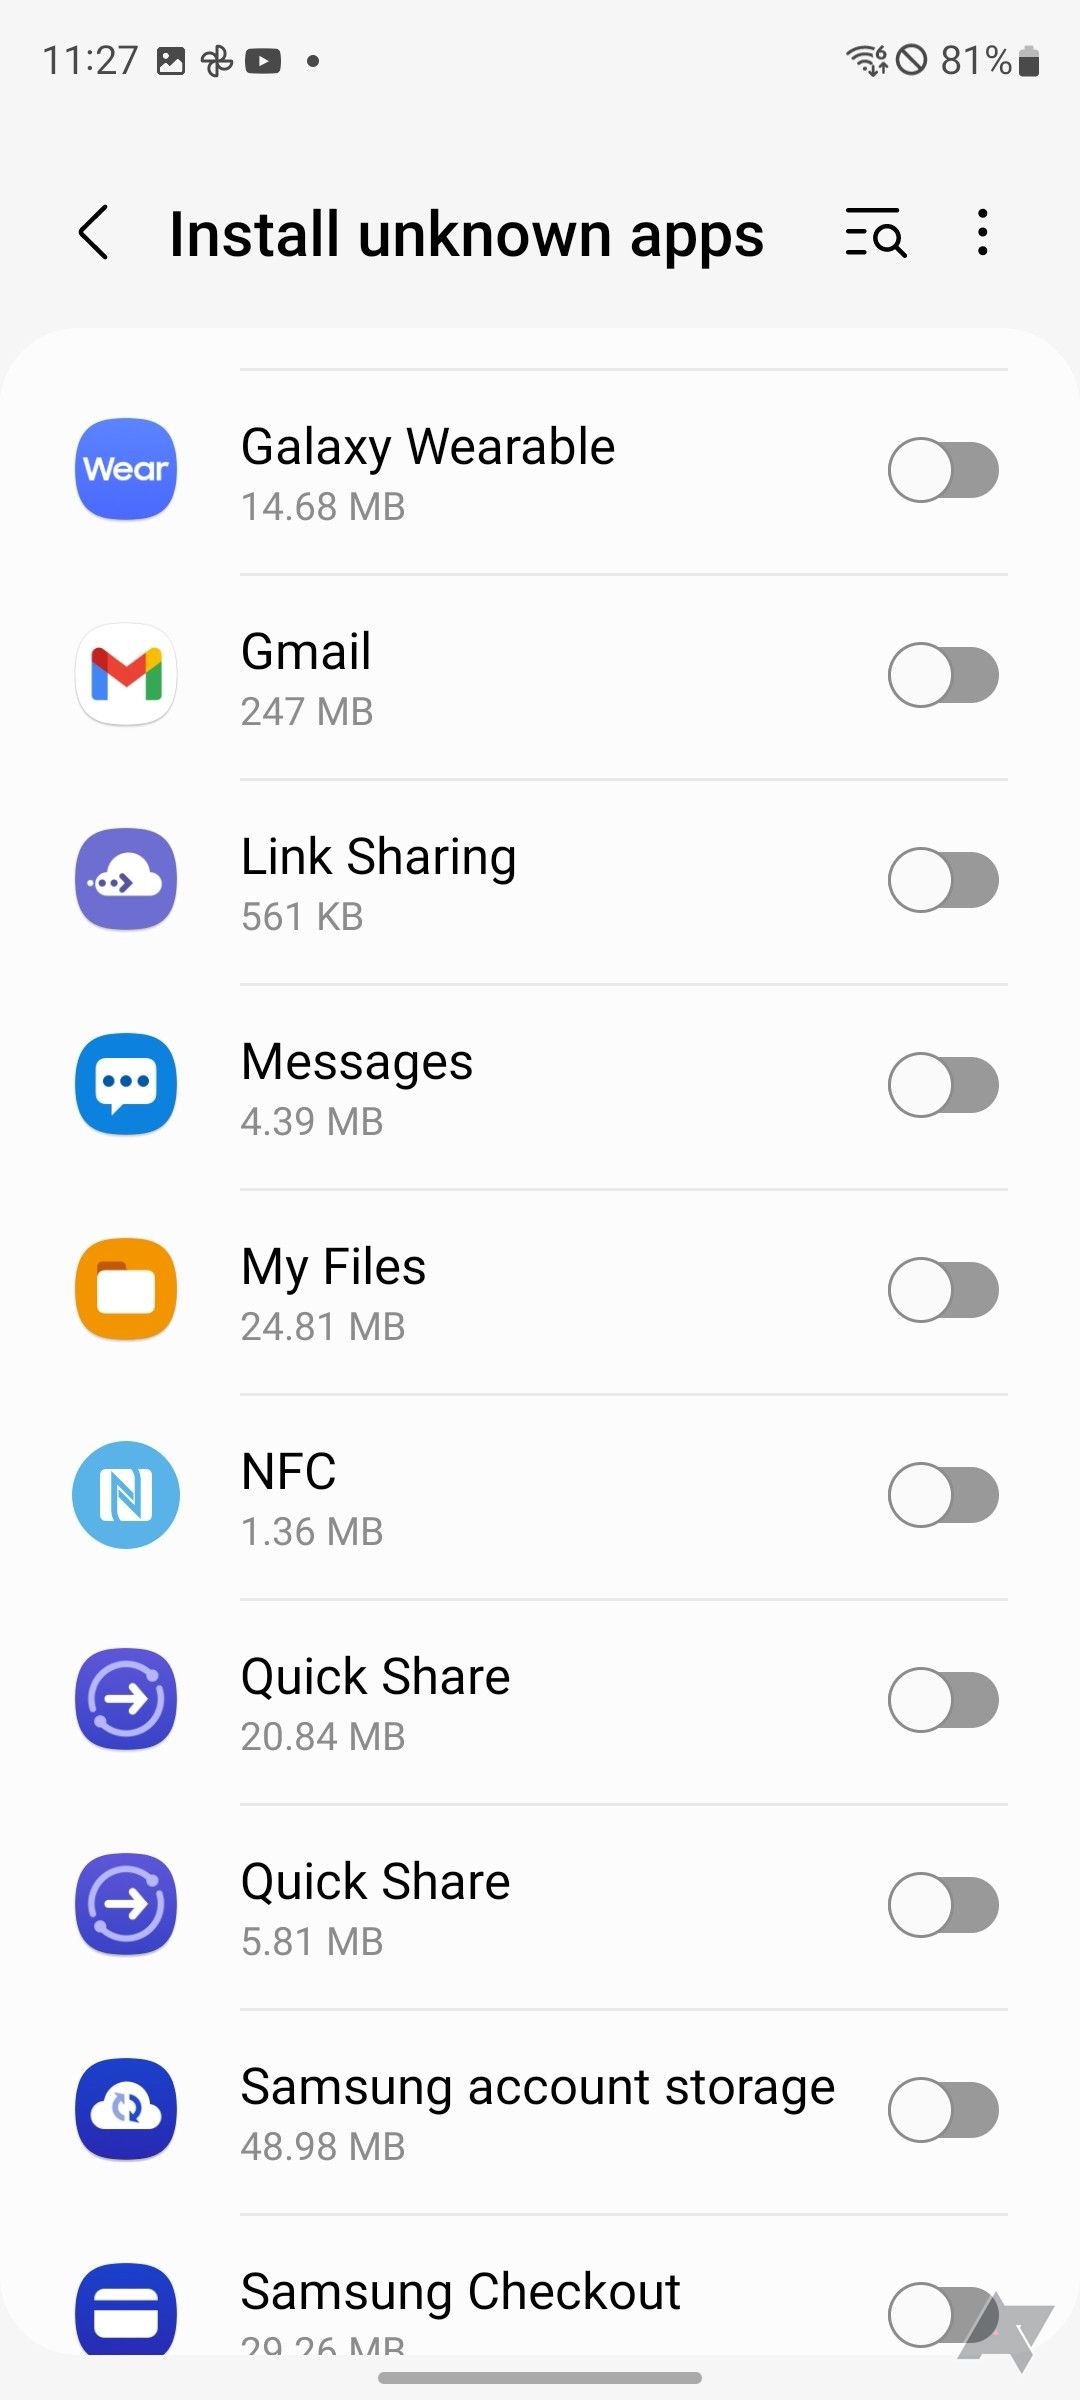 List of apps on Android to give permission to install apps.